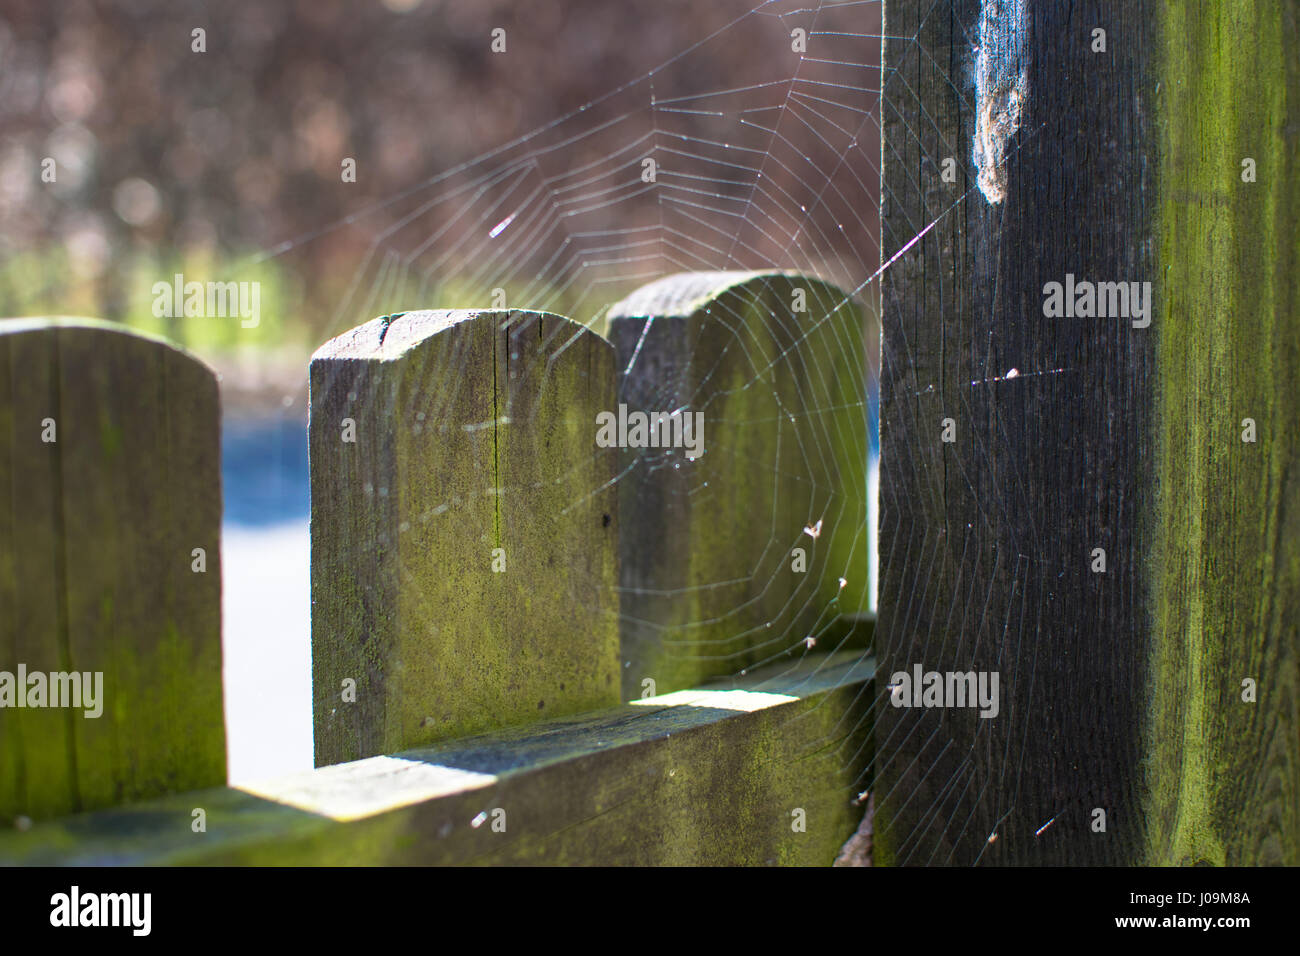 spider web on a wooden fence in the afternoon Stock Photo